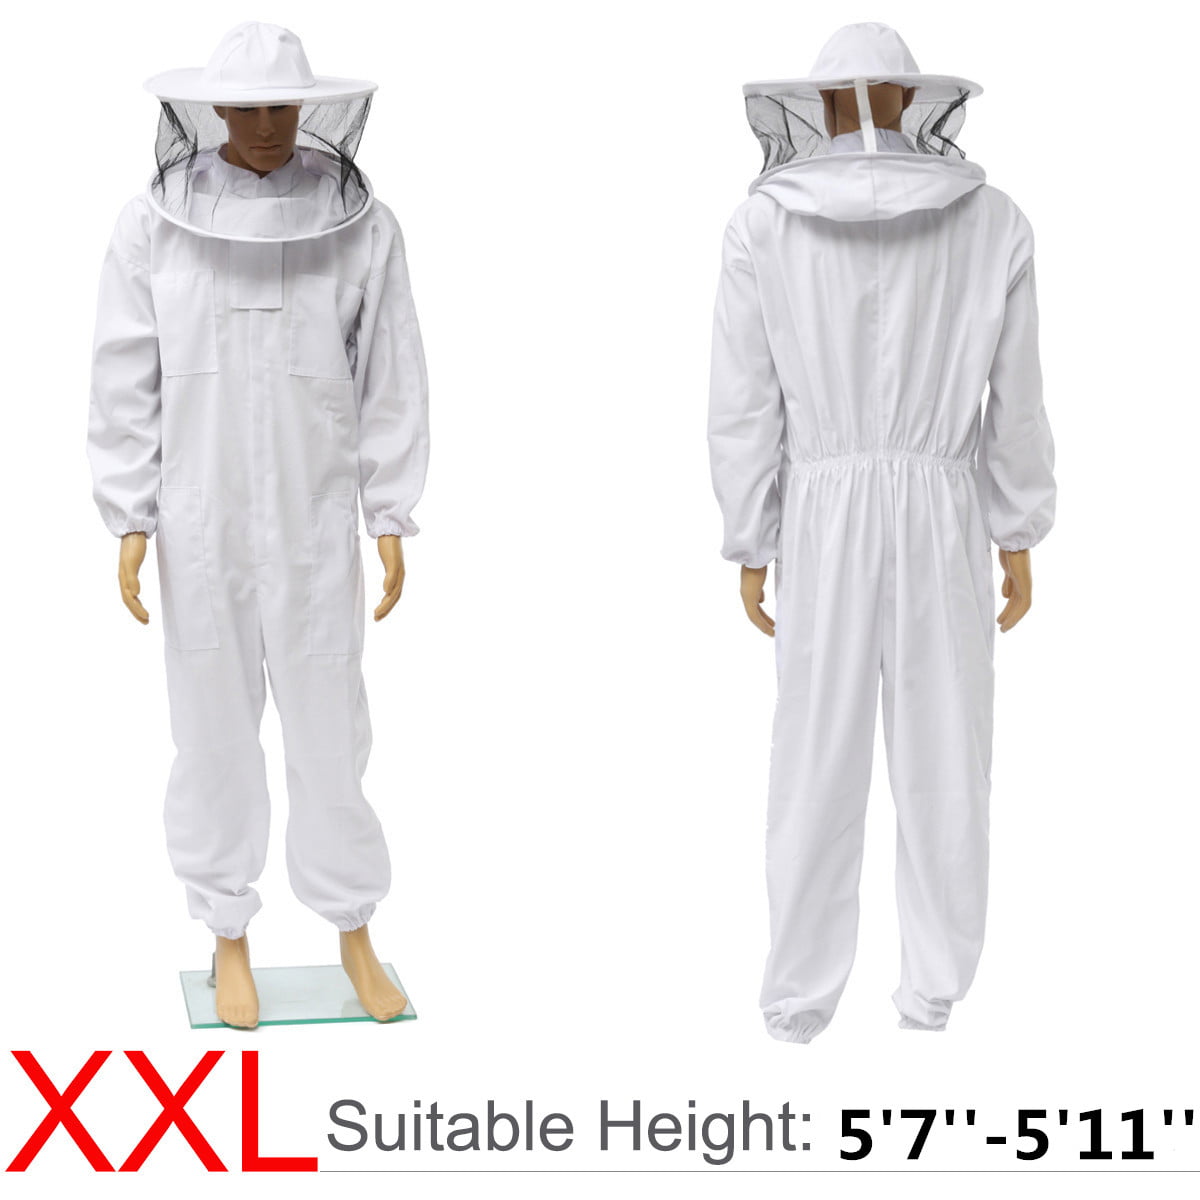 2XL Bee Keeper Suit Beekeeping Veil Jacket Protection Outfit Hat Sting Proof